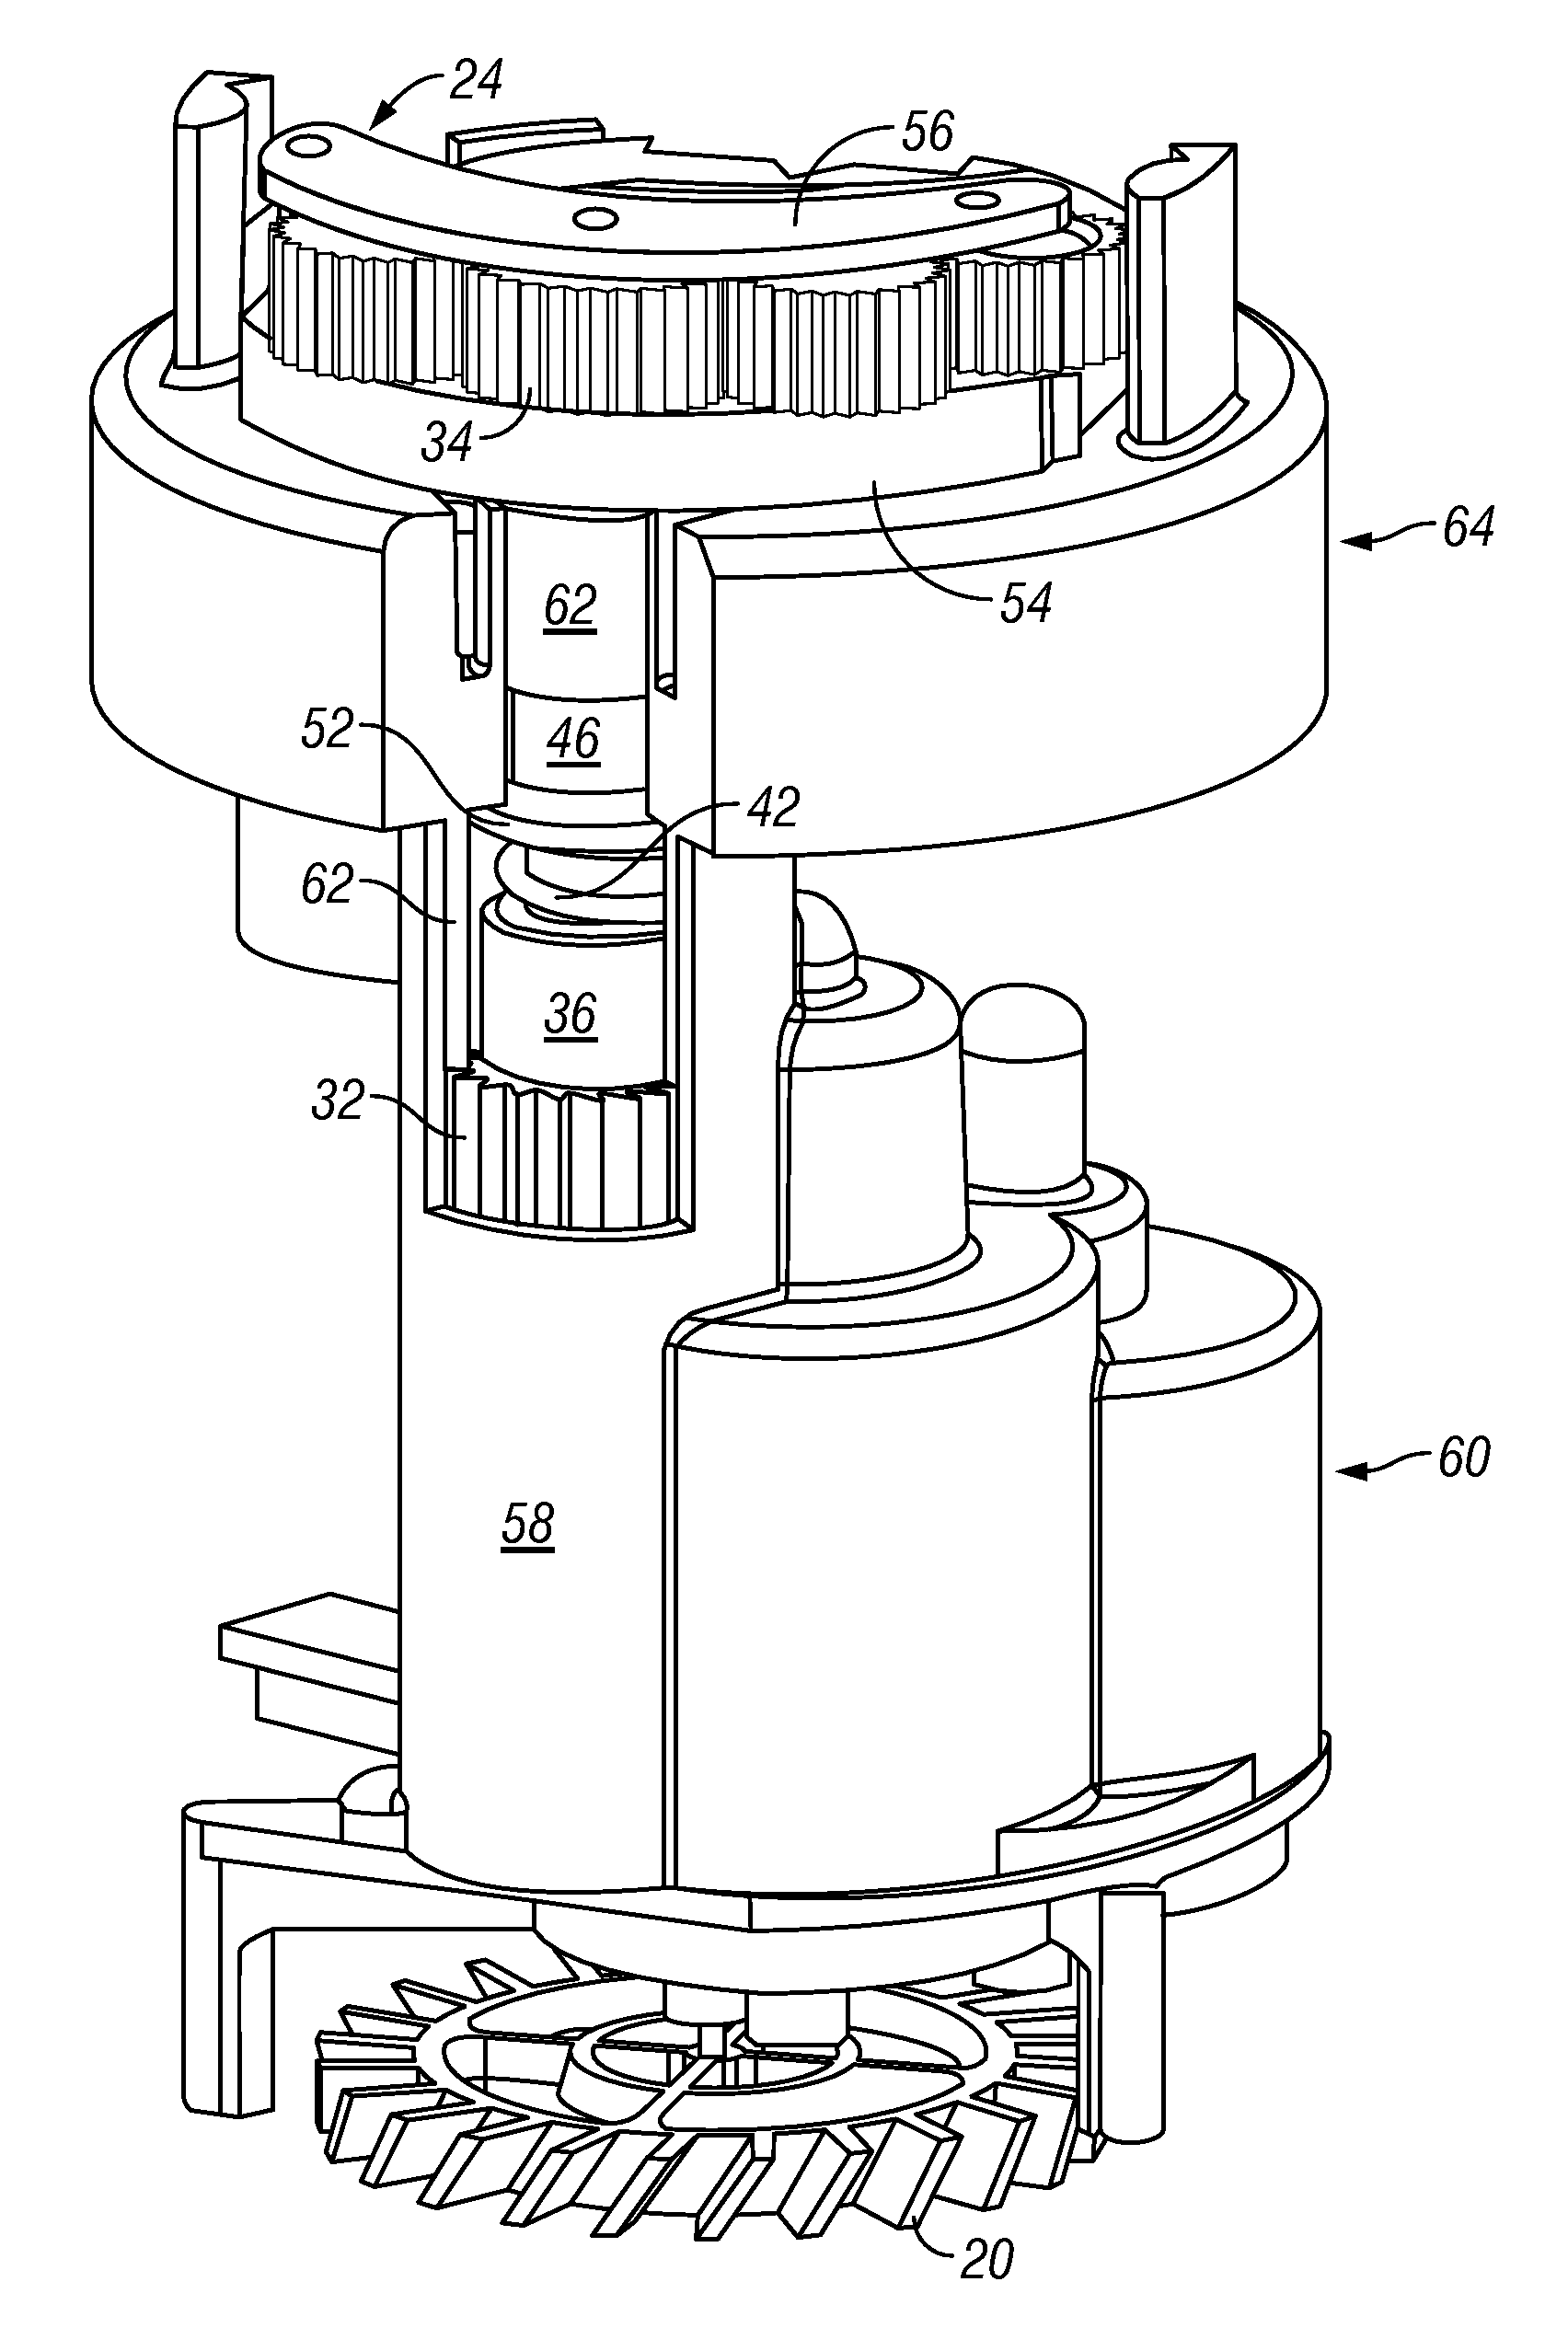 Axially displacing slip-clutch for rotor-type sprinkler